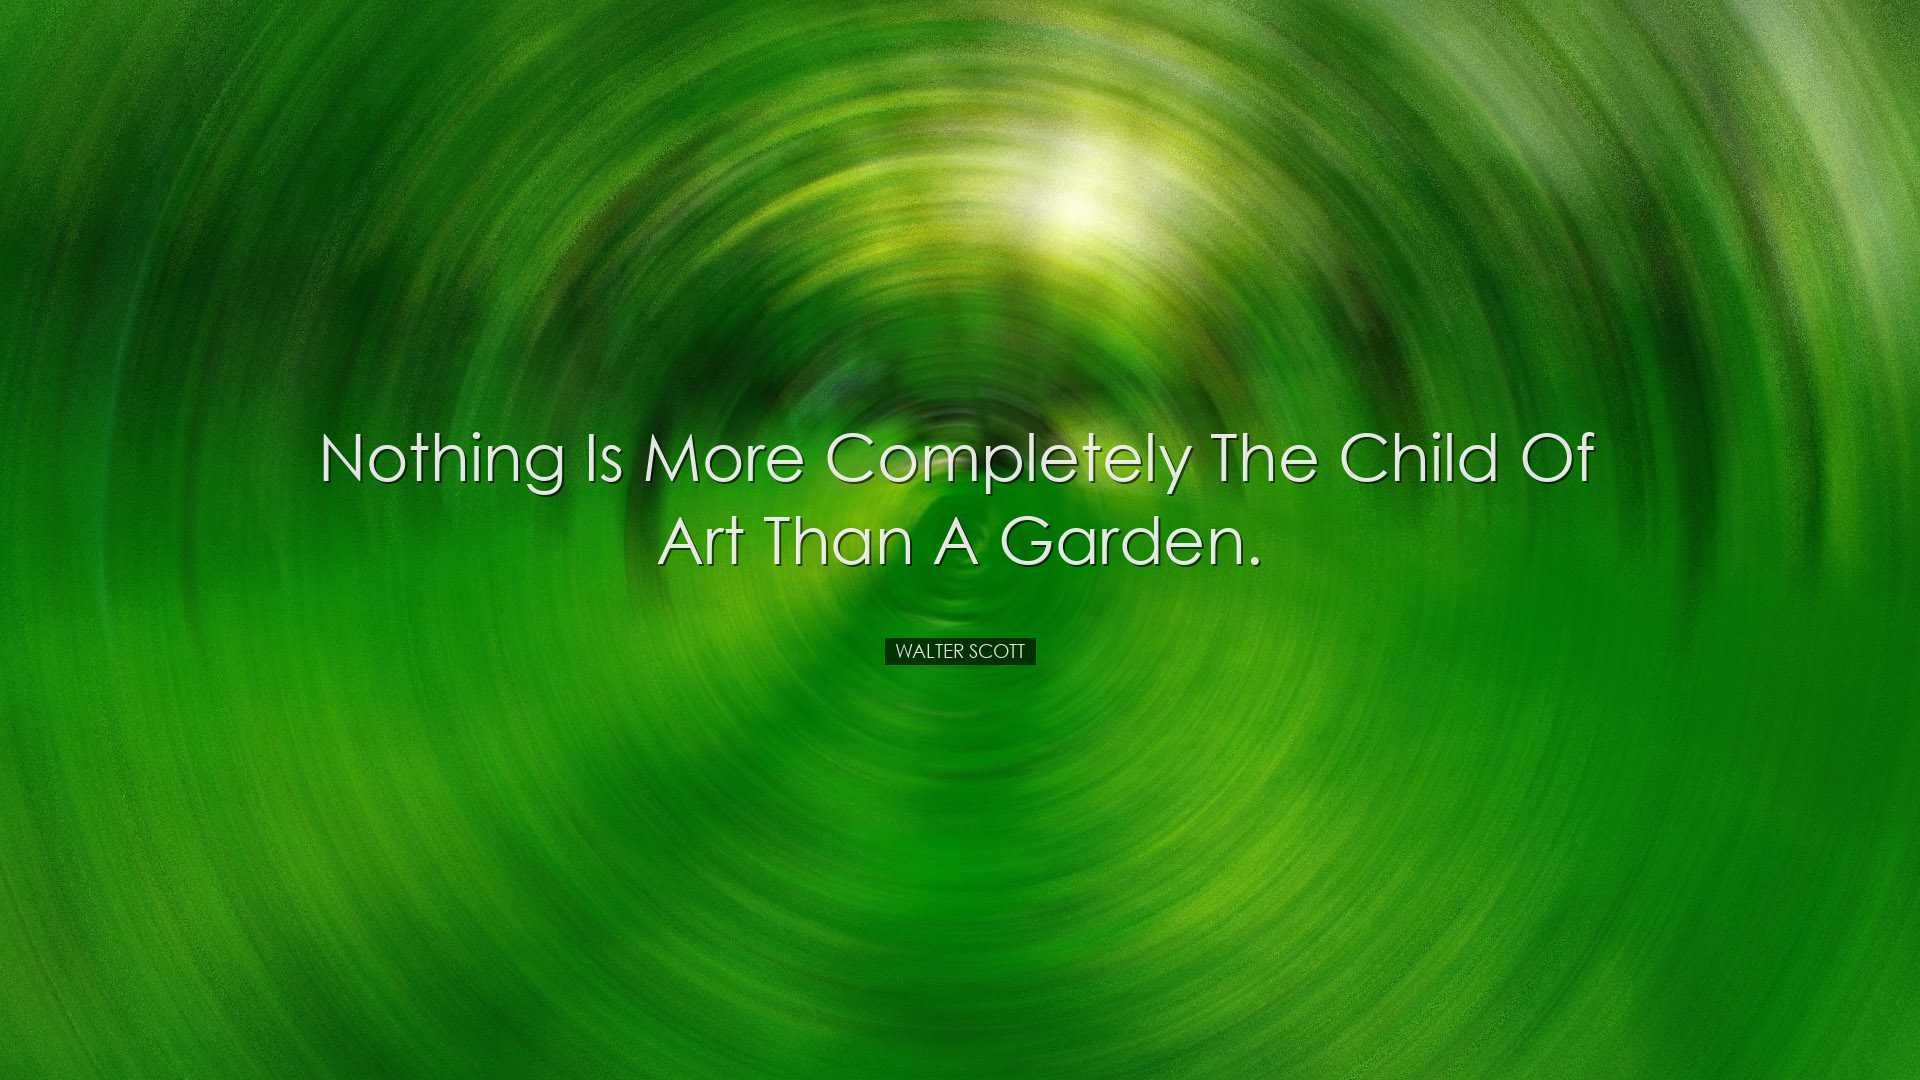 Nothing is more completely the child of Art than a Garden. - Walte